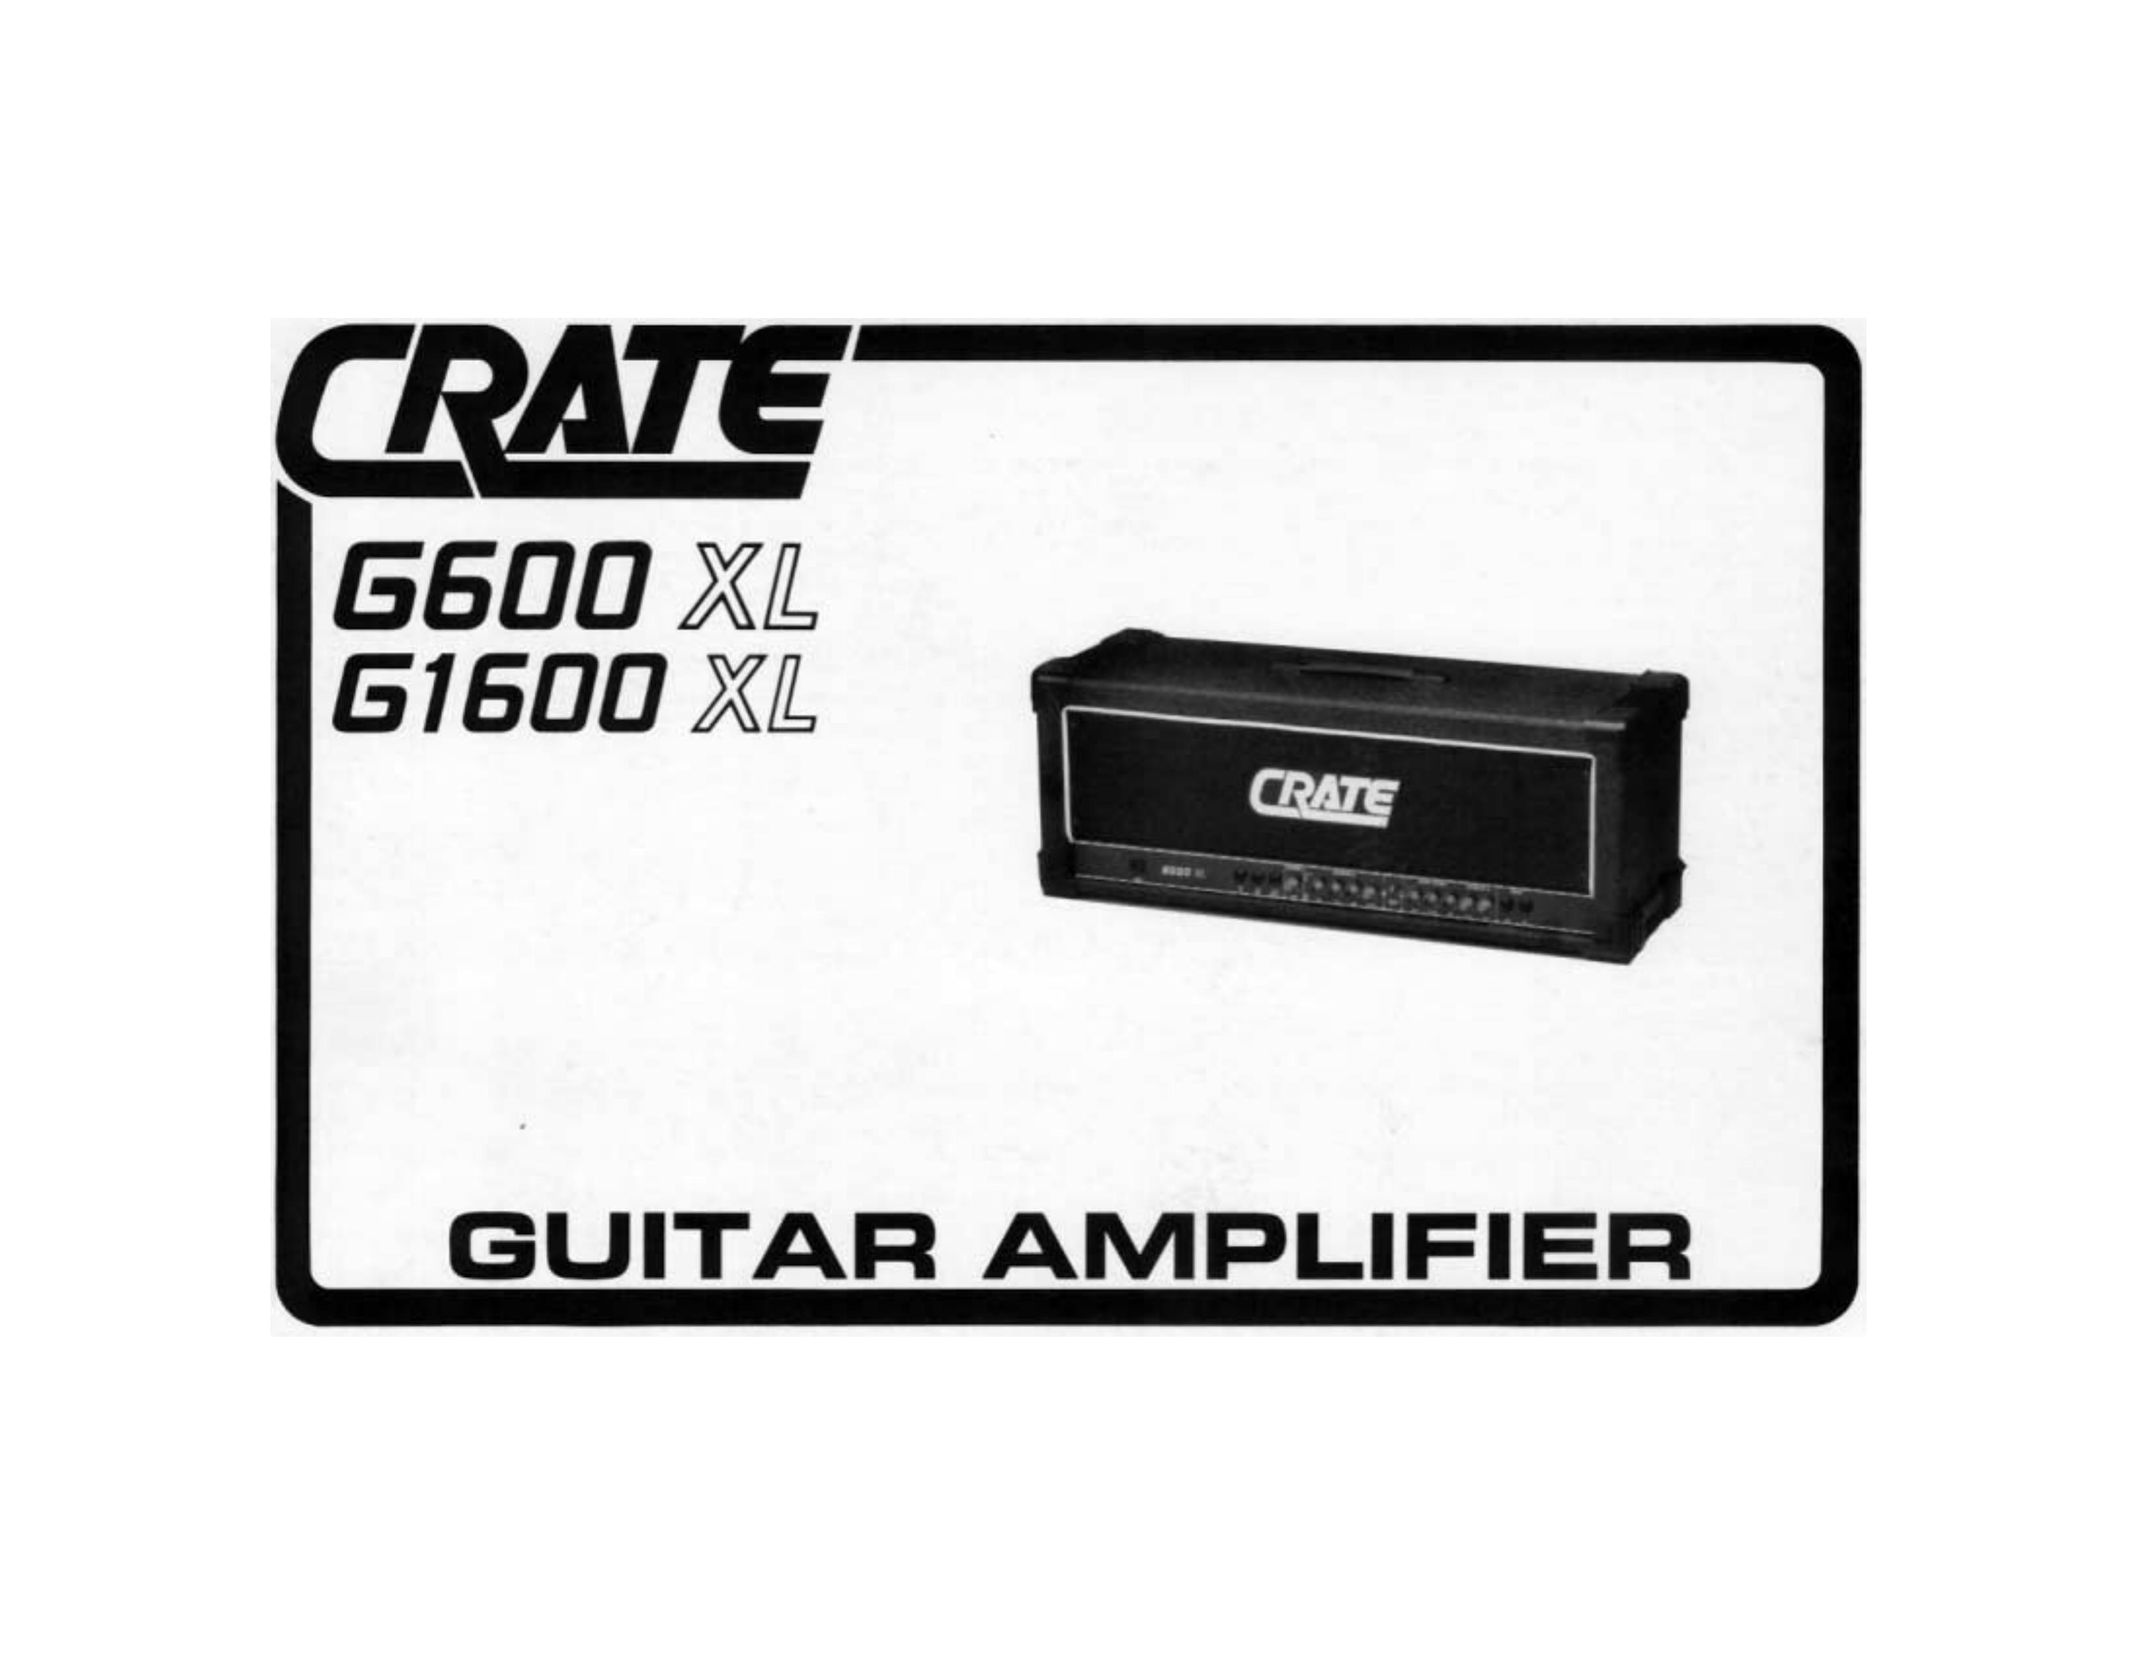 Crate Amplifiers G600XL Speaker System User Manual